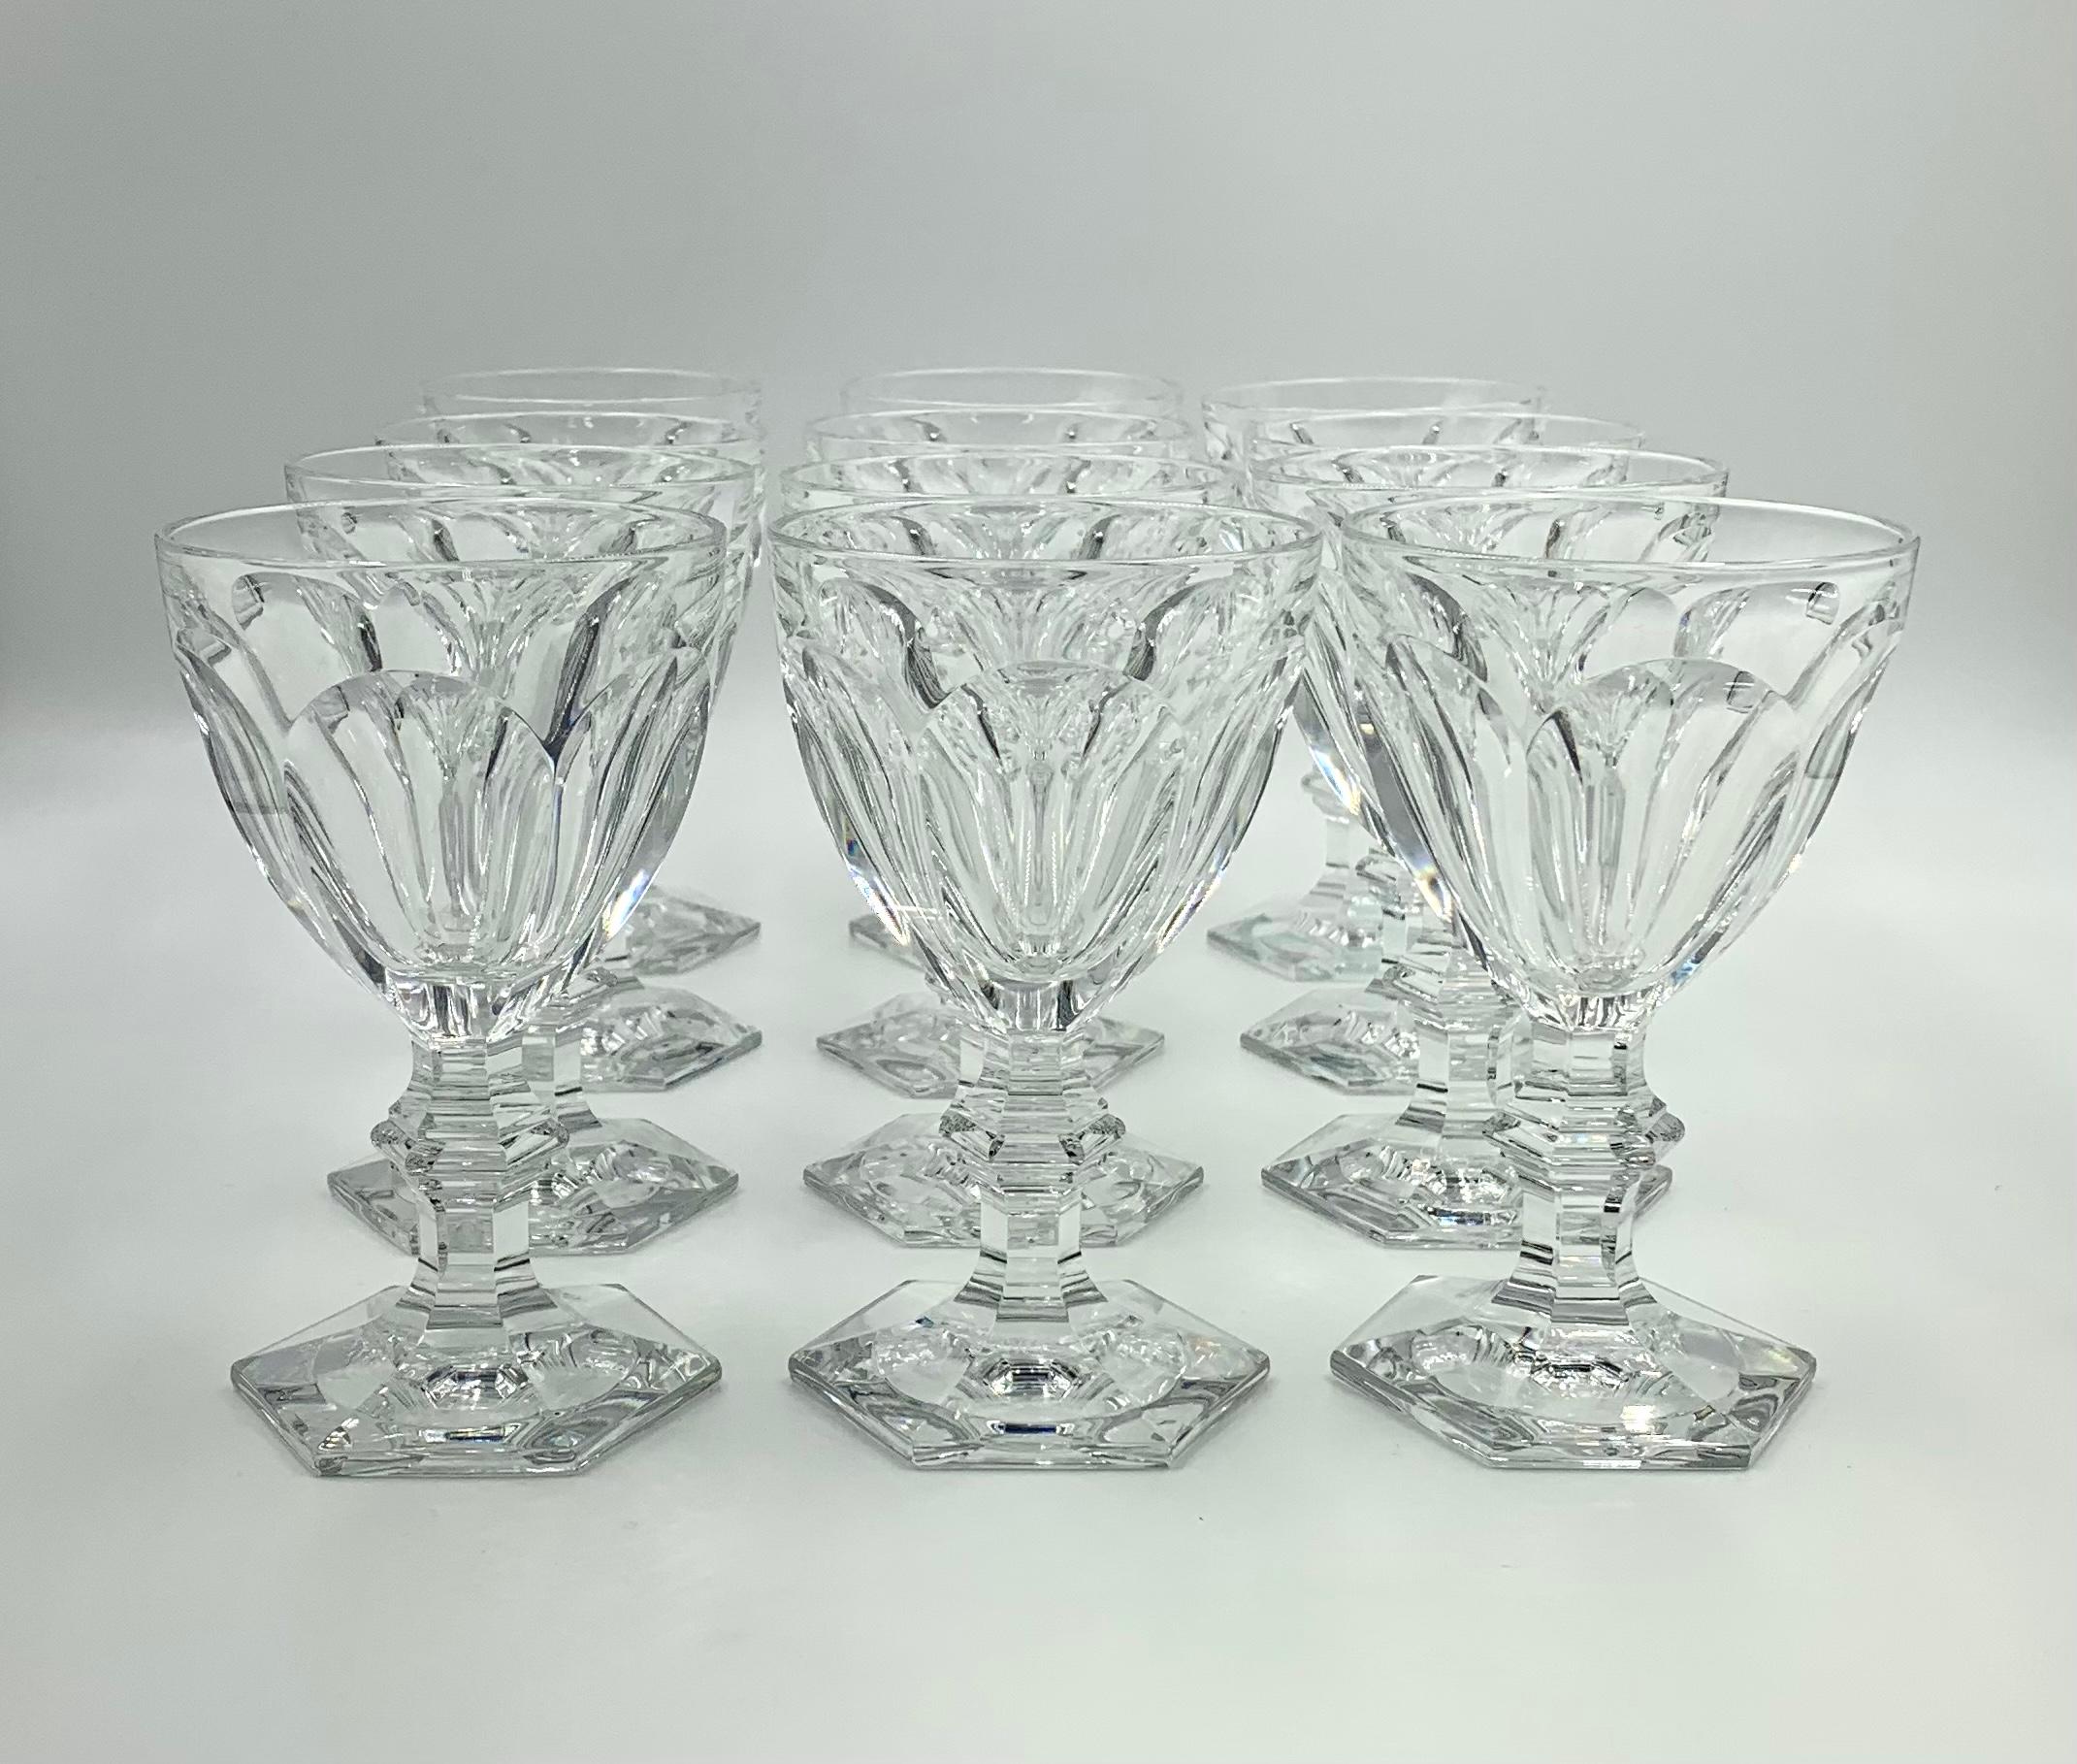 Fine set of twelve Baccarat Harcourt 1841 wine goblets in excellent condition.
Iconic Baccarat design, beautiful proportions, hand-crafted in France.
Each signed on the base
Height 5.25 inches
Diameter 3.25 inches.
 